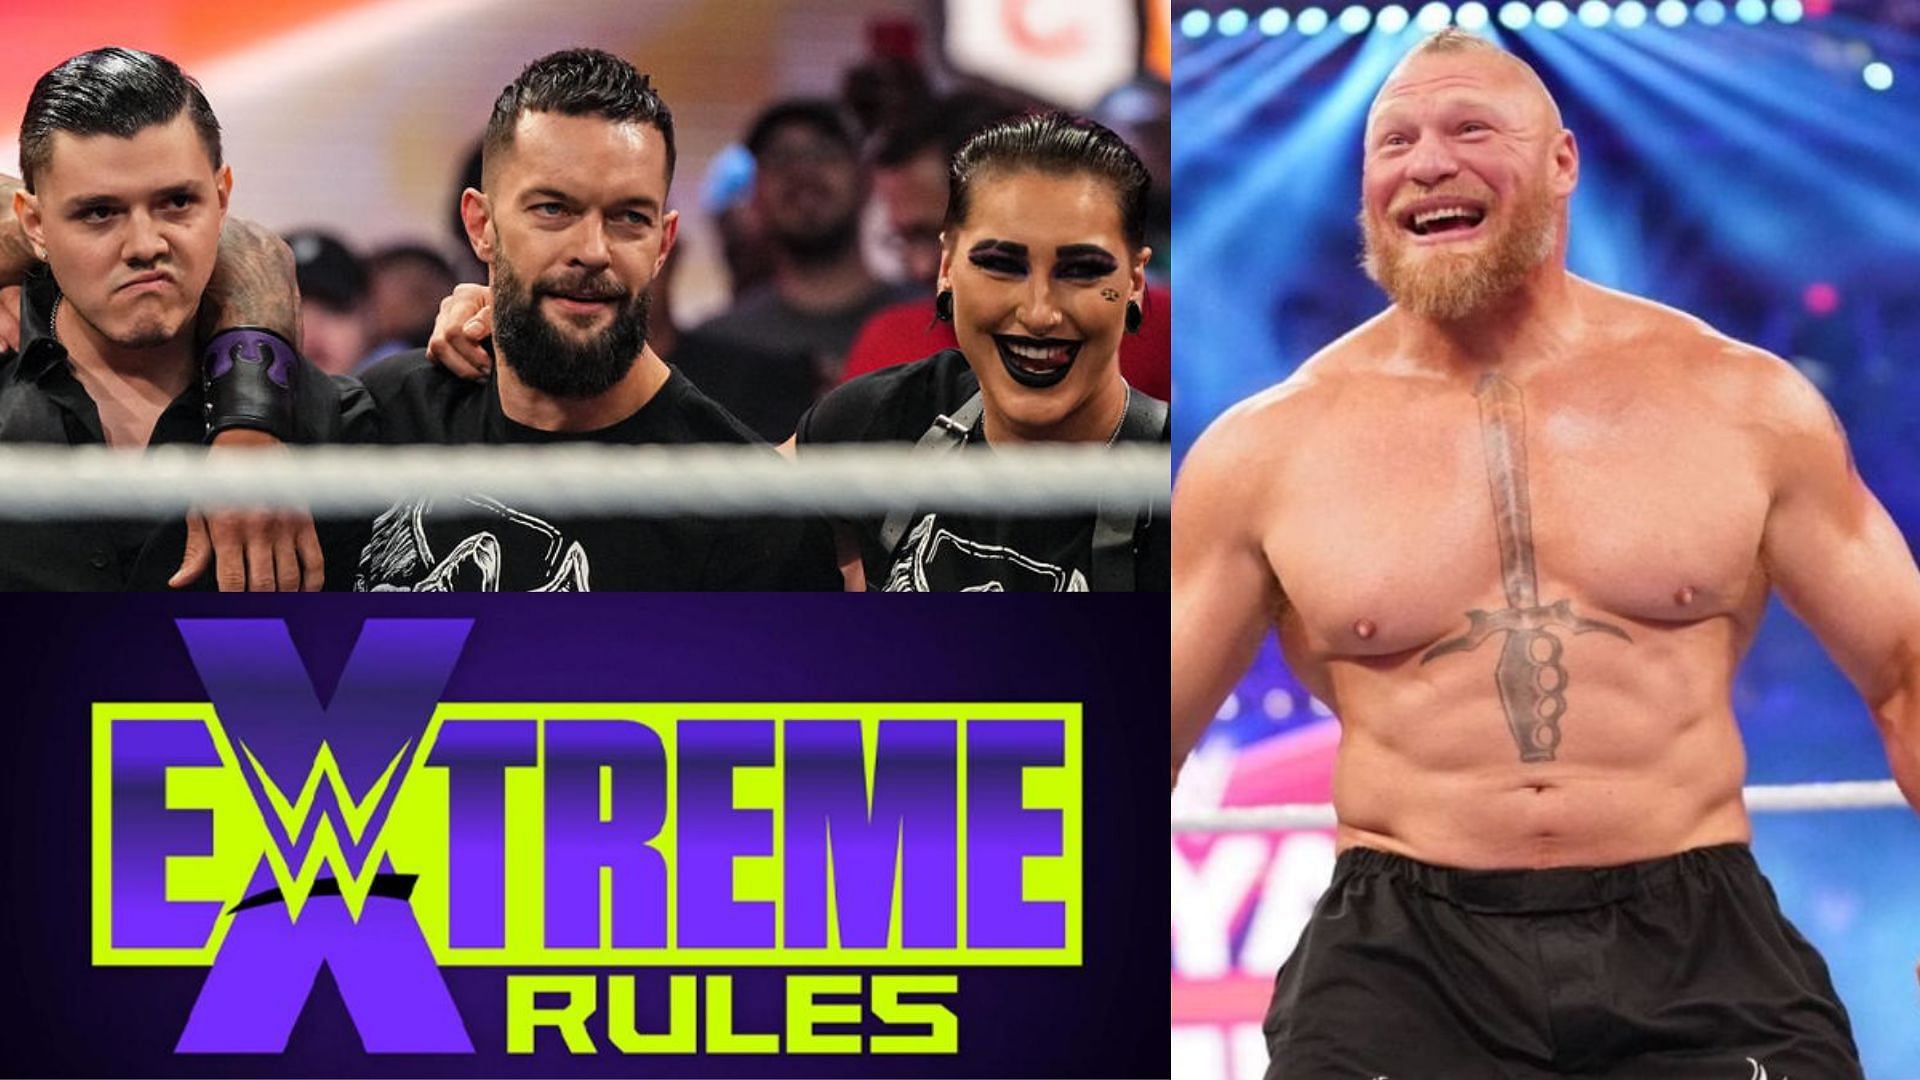 Extreme Rules could be a massive show.